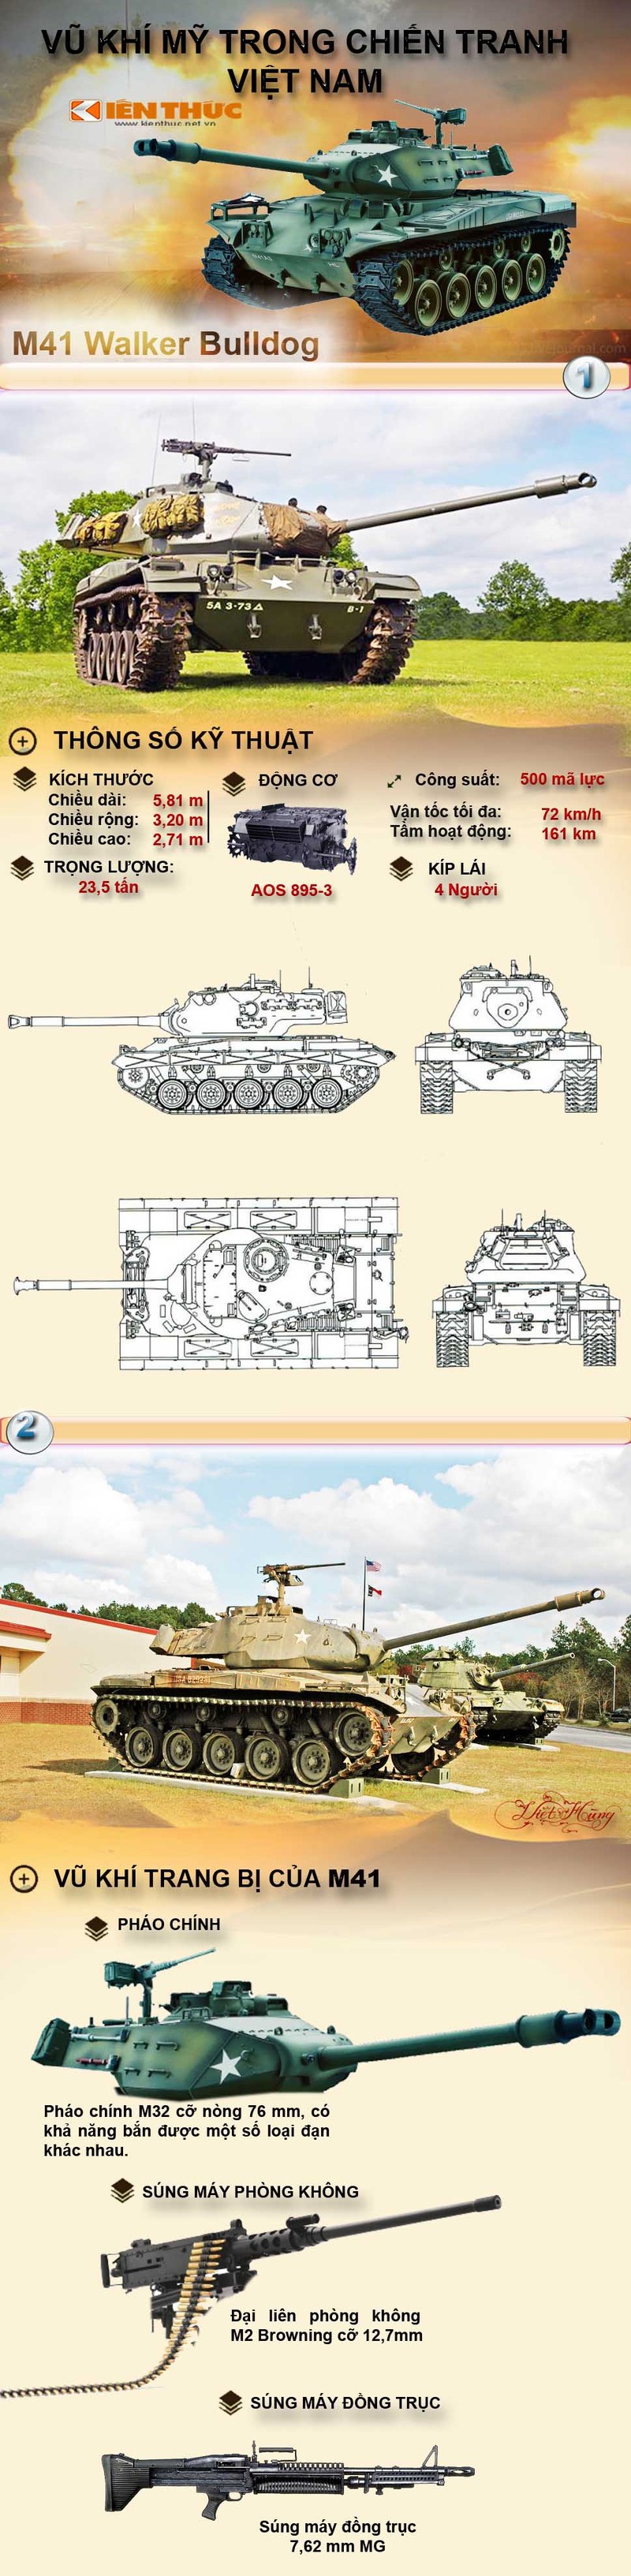 Infographic: Xe tang M41 trong Chien tranh Viet Nam